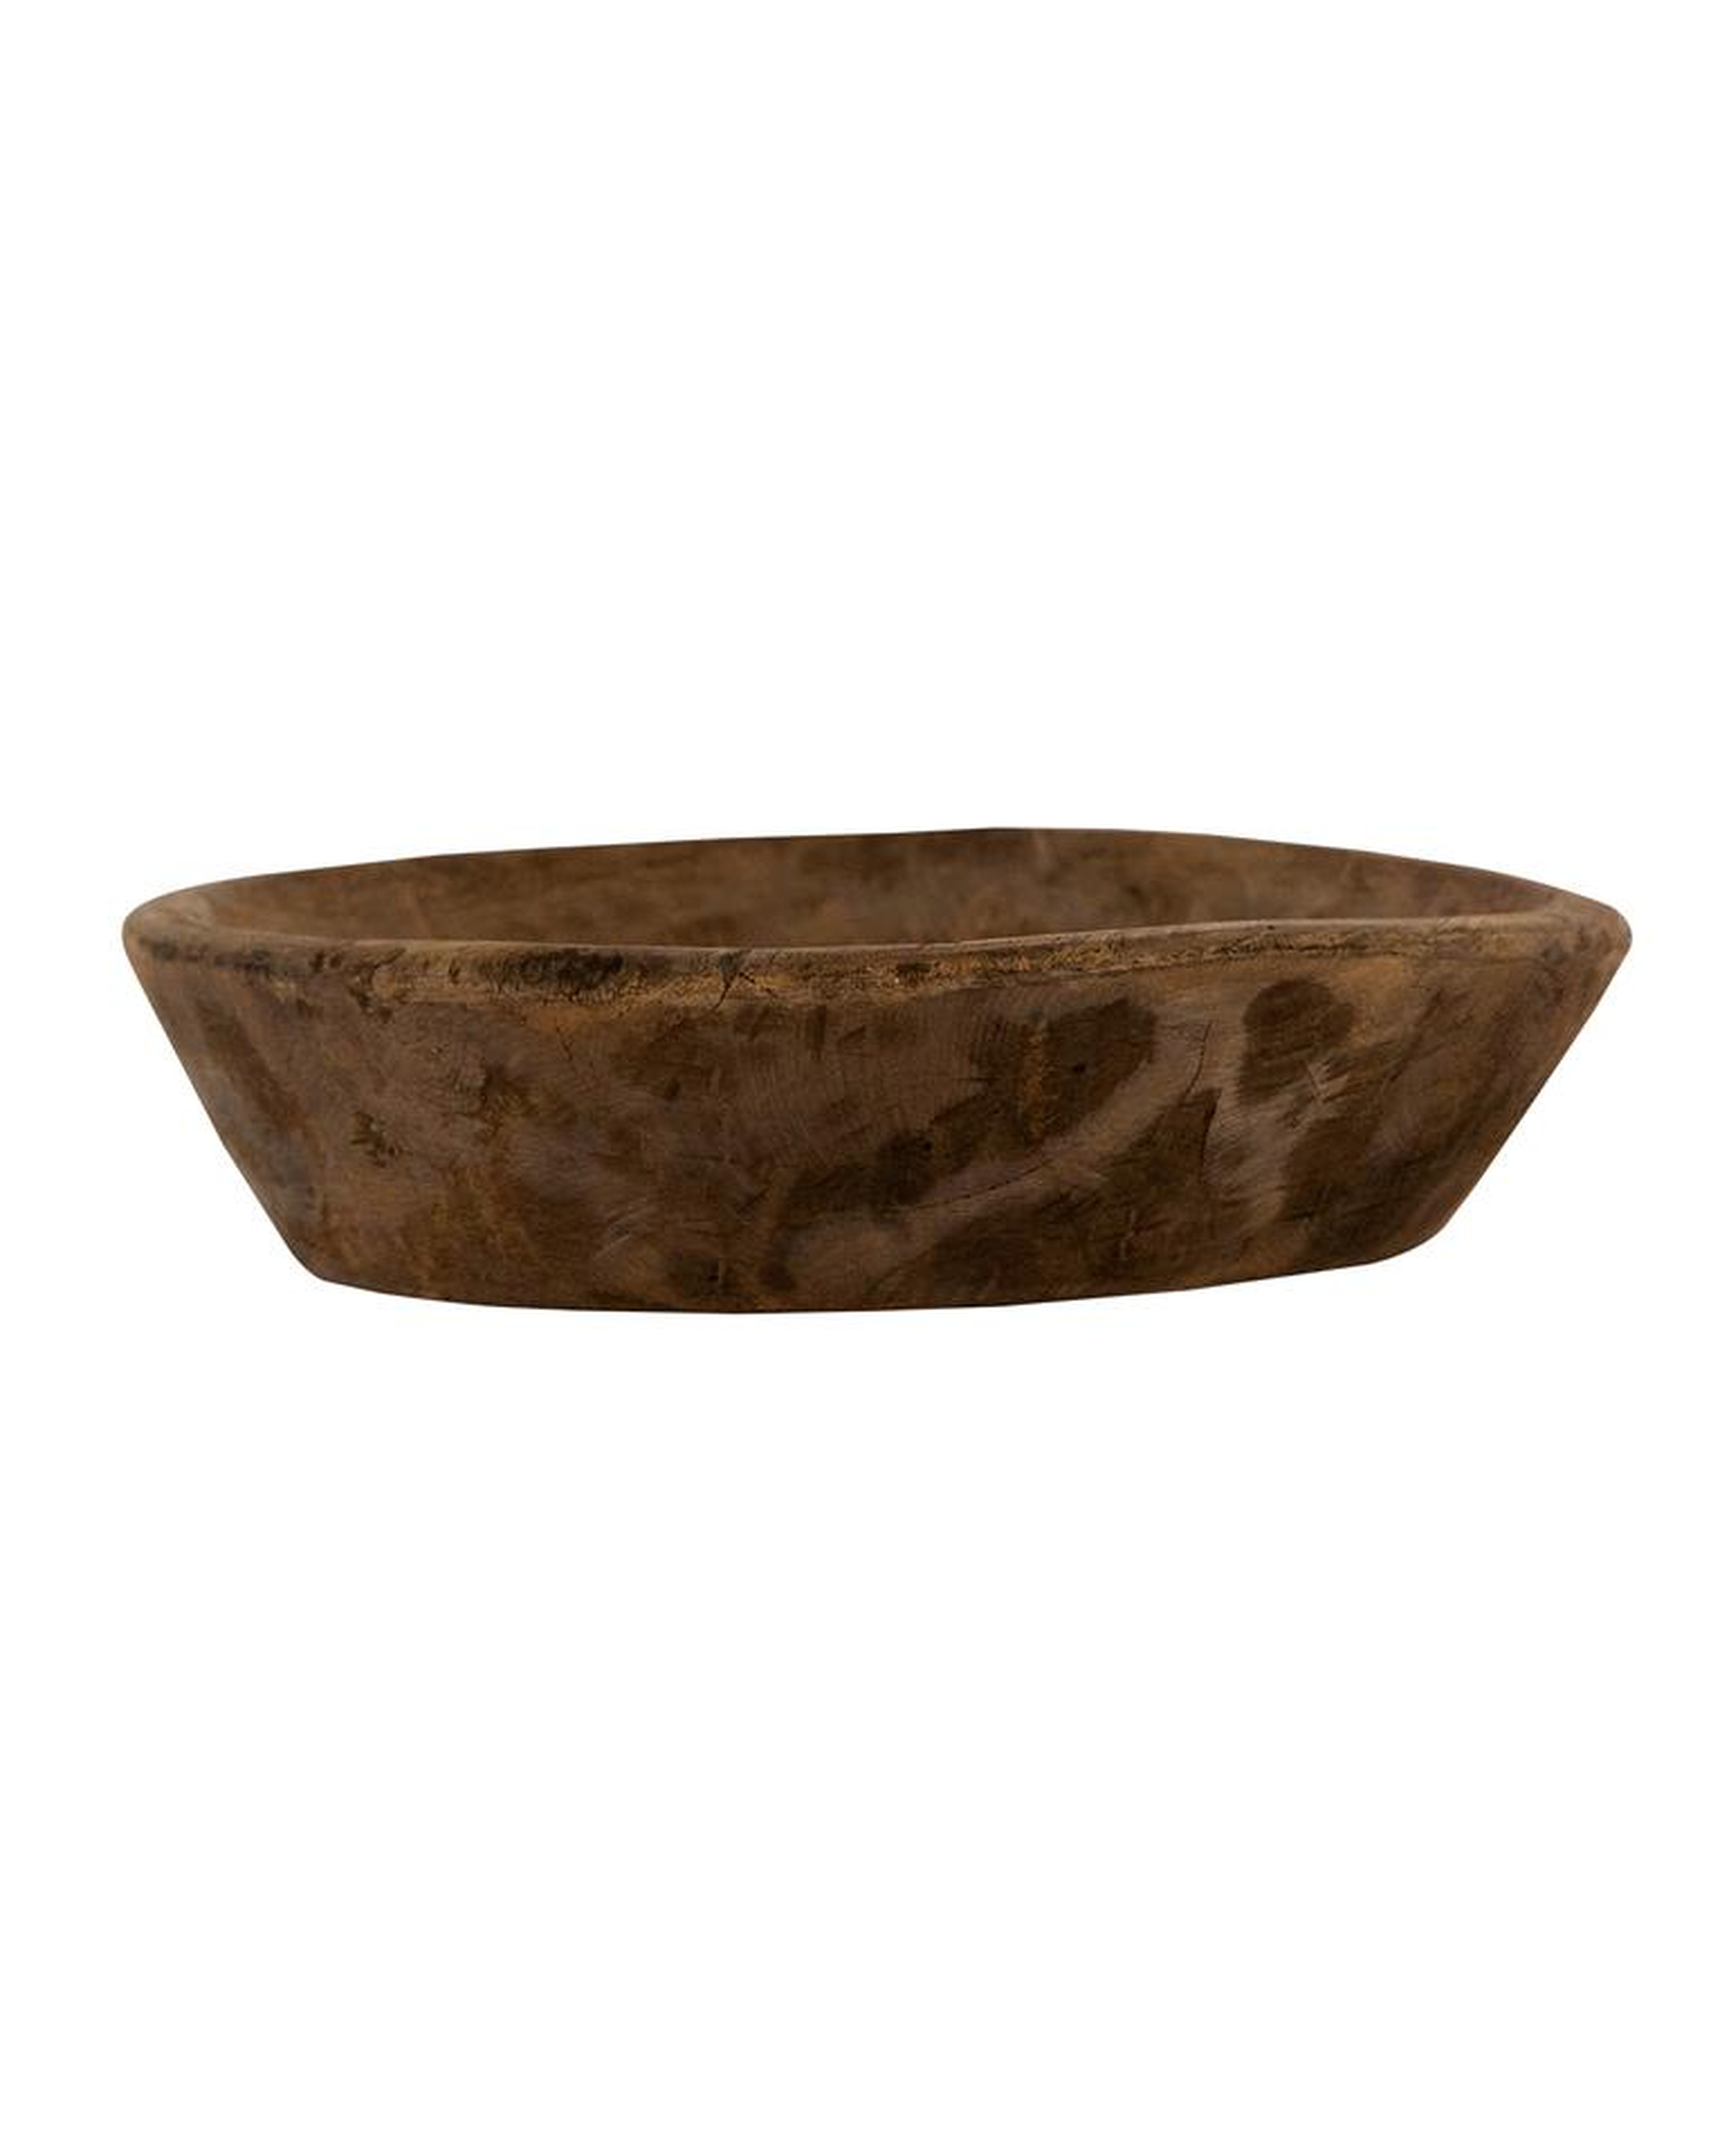 NICCOLO HAND-CARVED BOWL - McGee & Co.